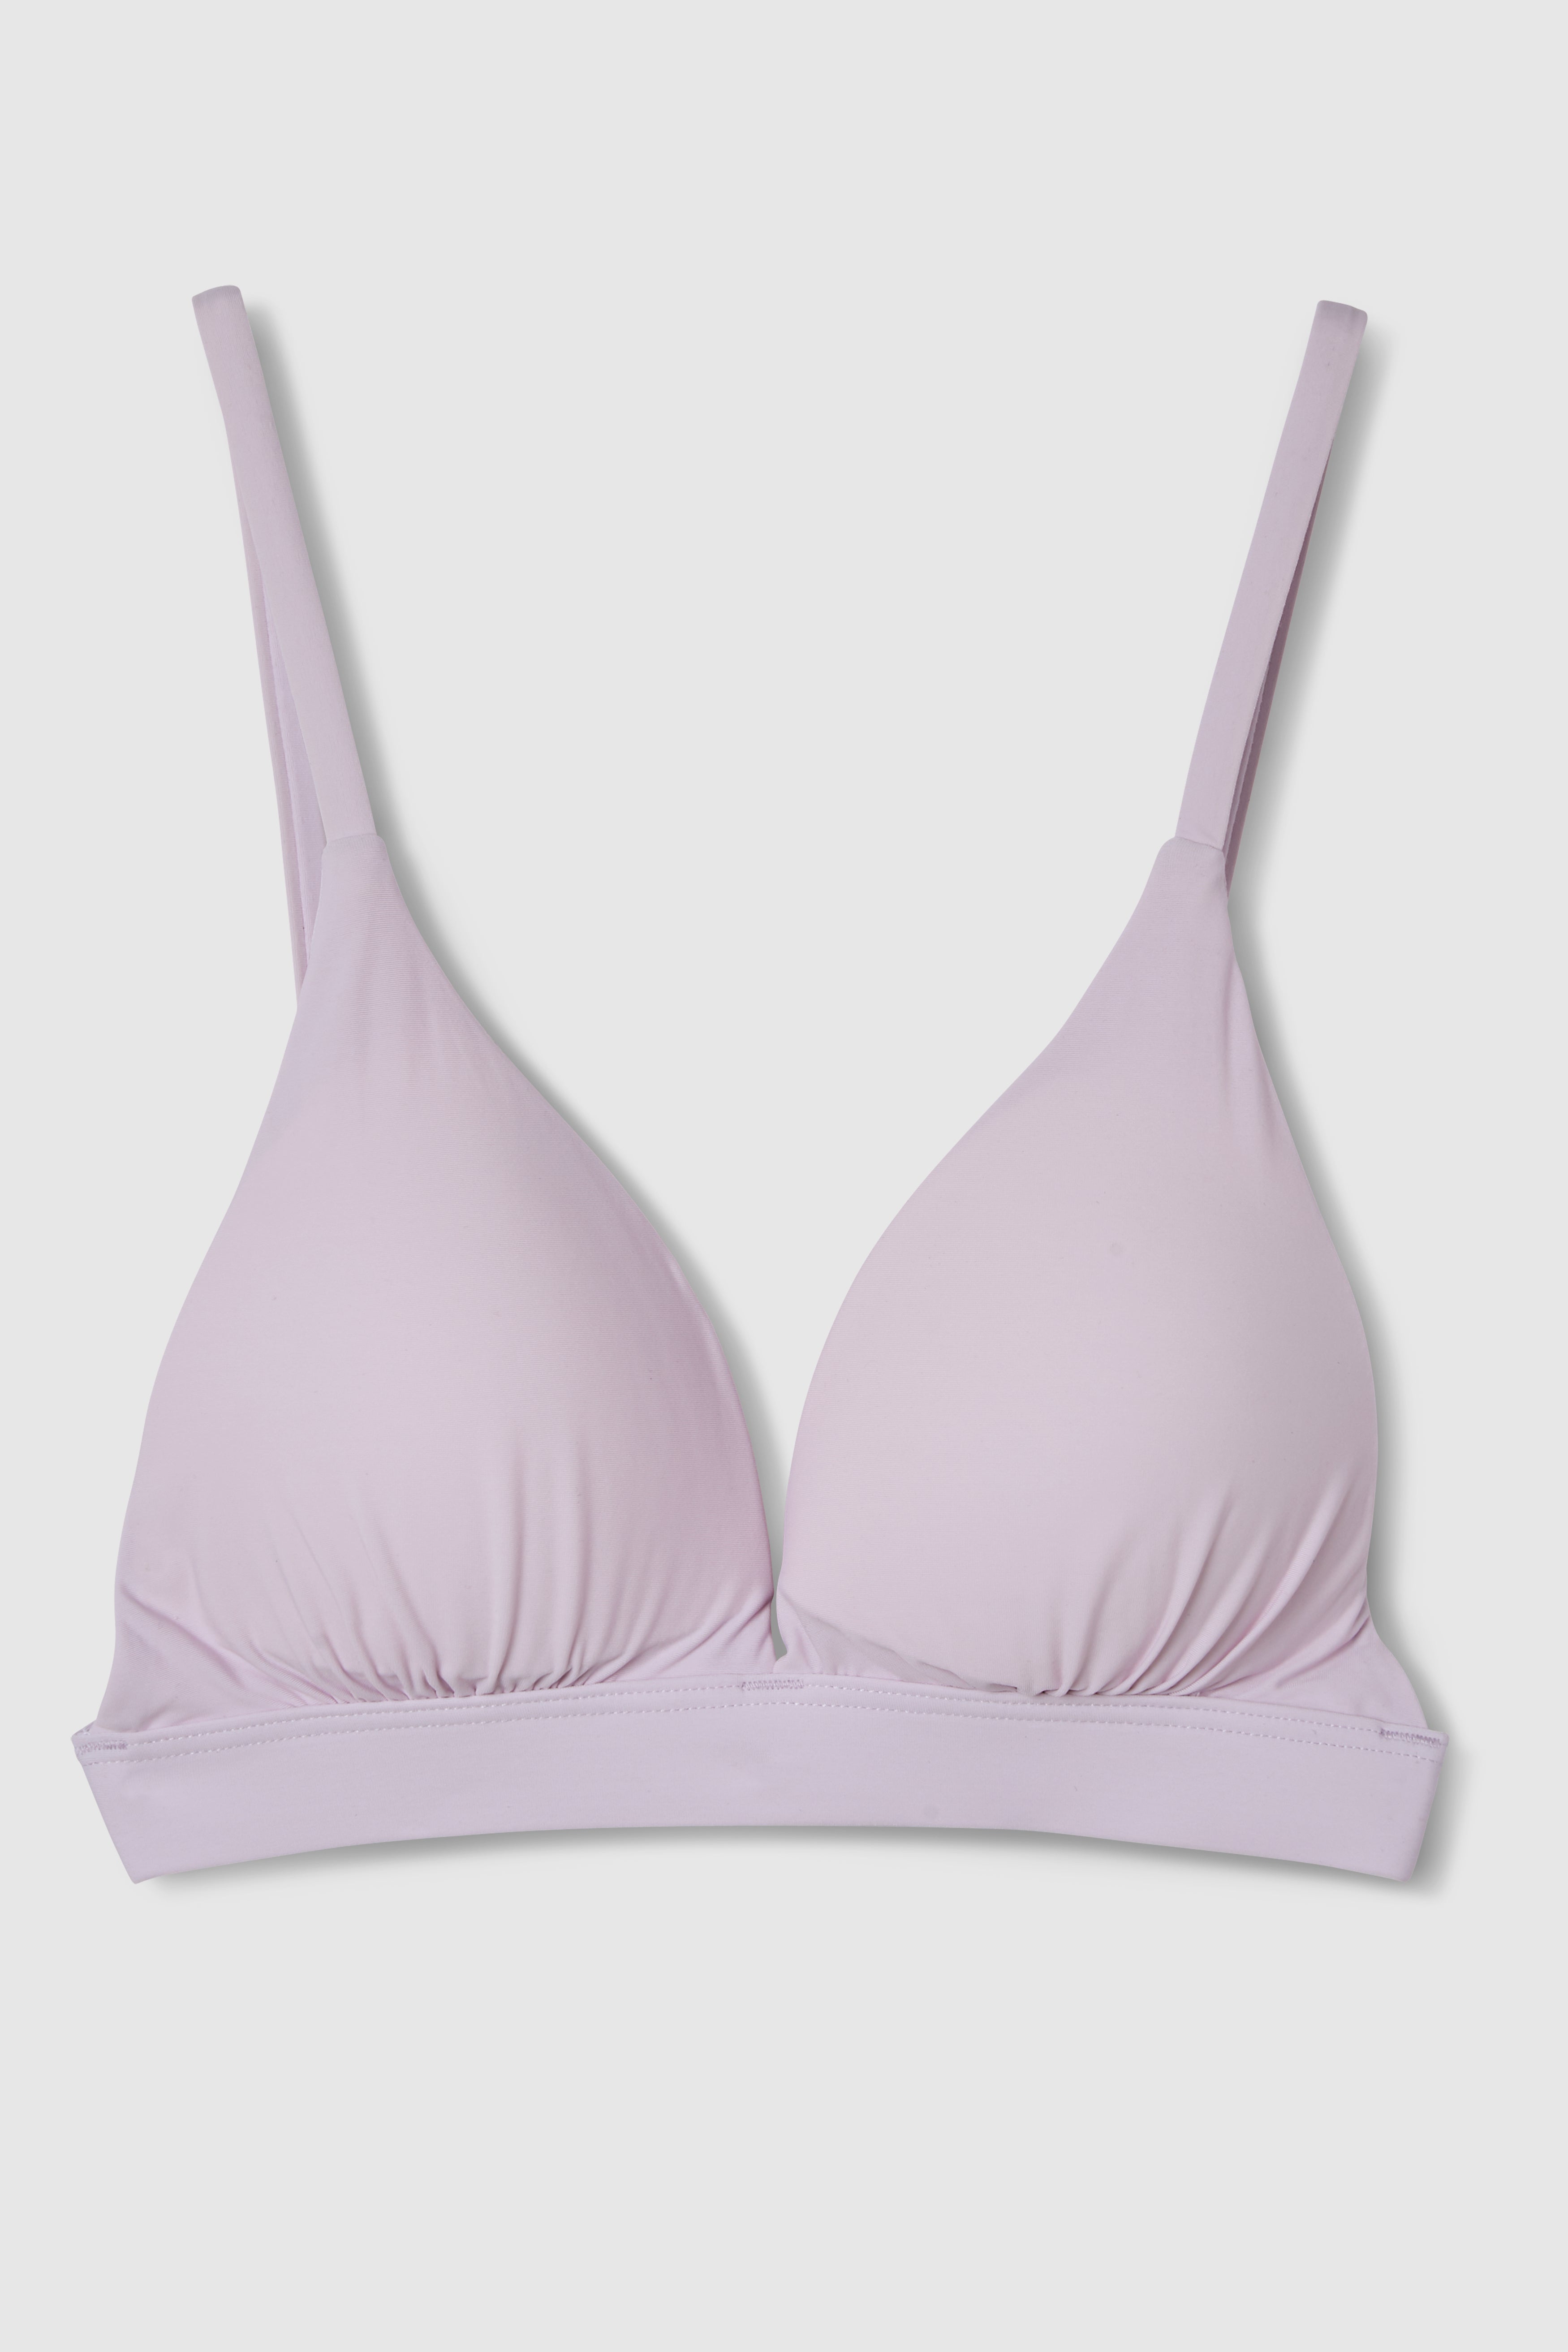 Cotton:On seamless triangle 2 multi pack bralette in blush and grey